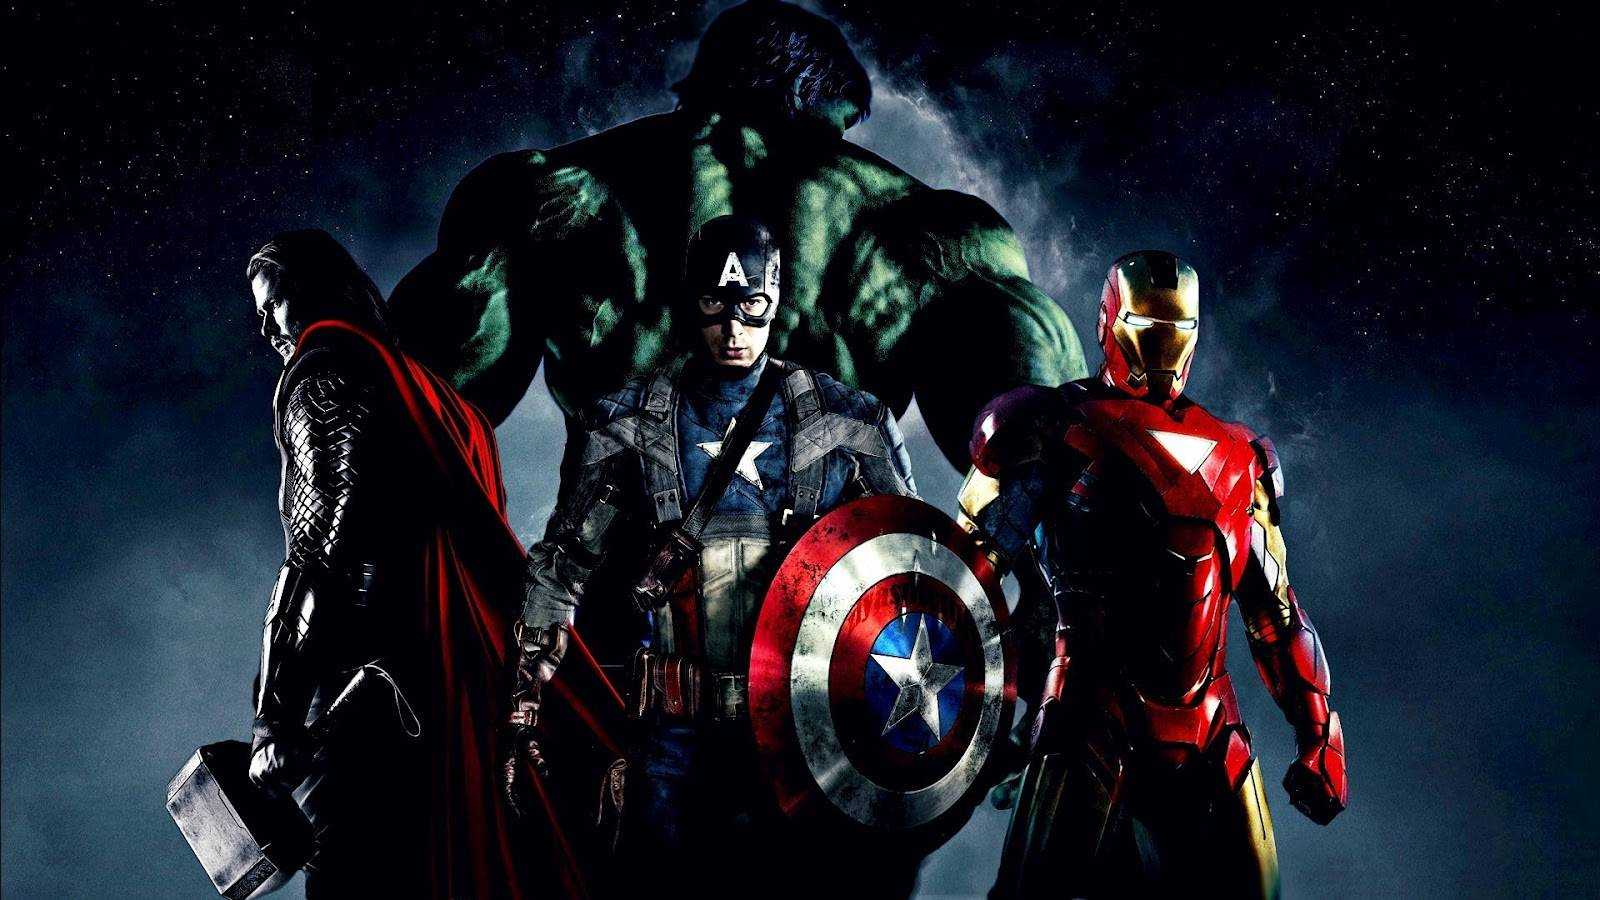 The Avengers Wallpaper HD Image Background Your Geeky